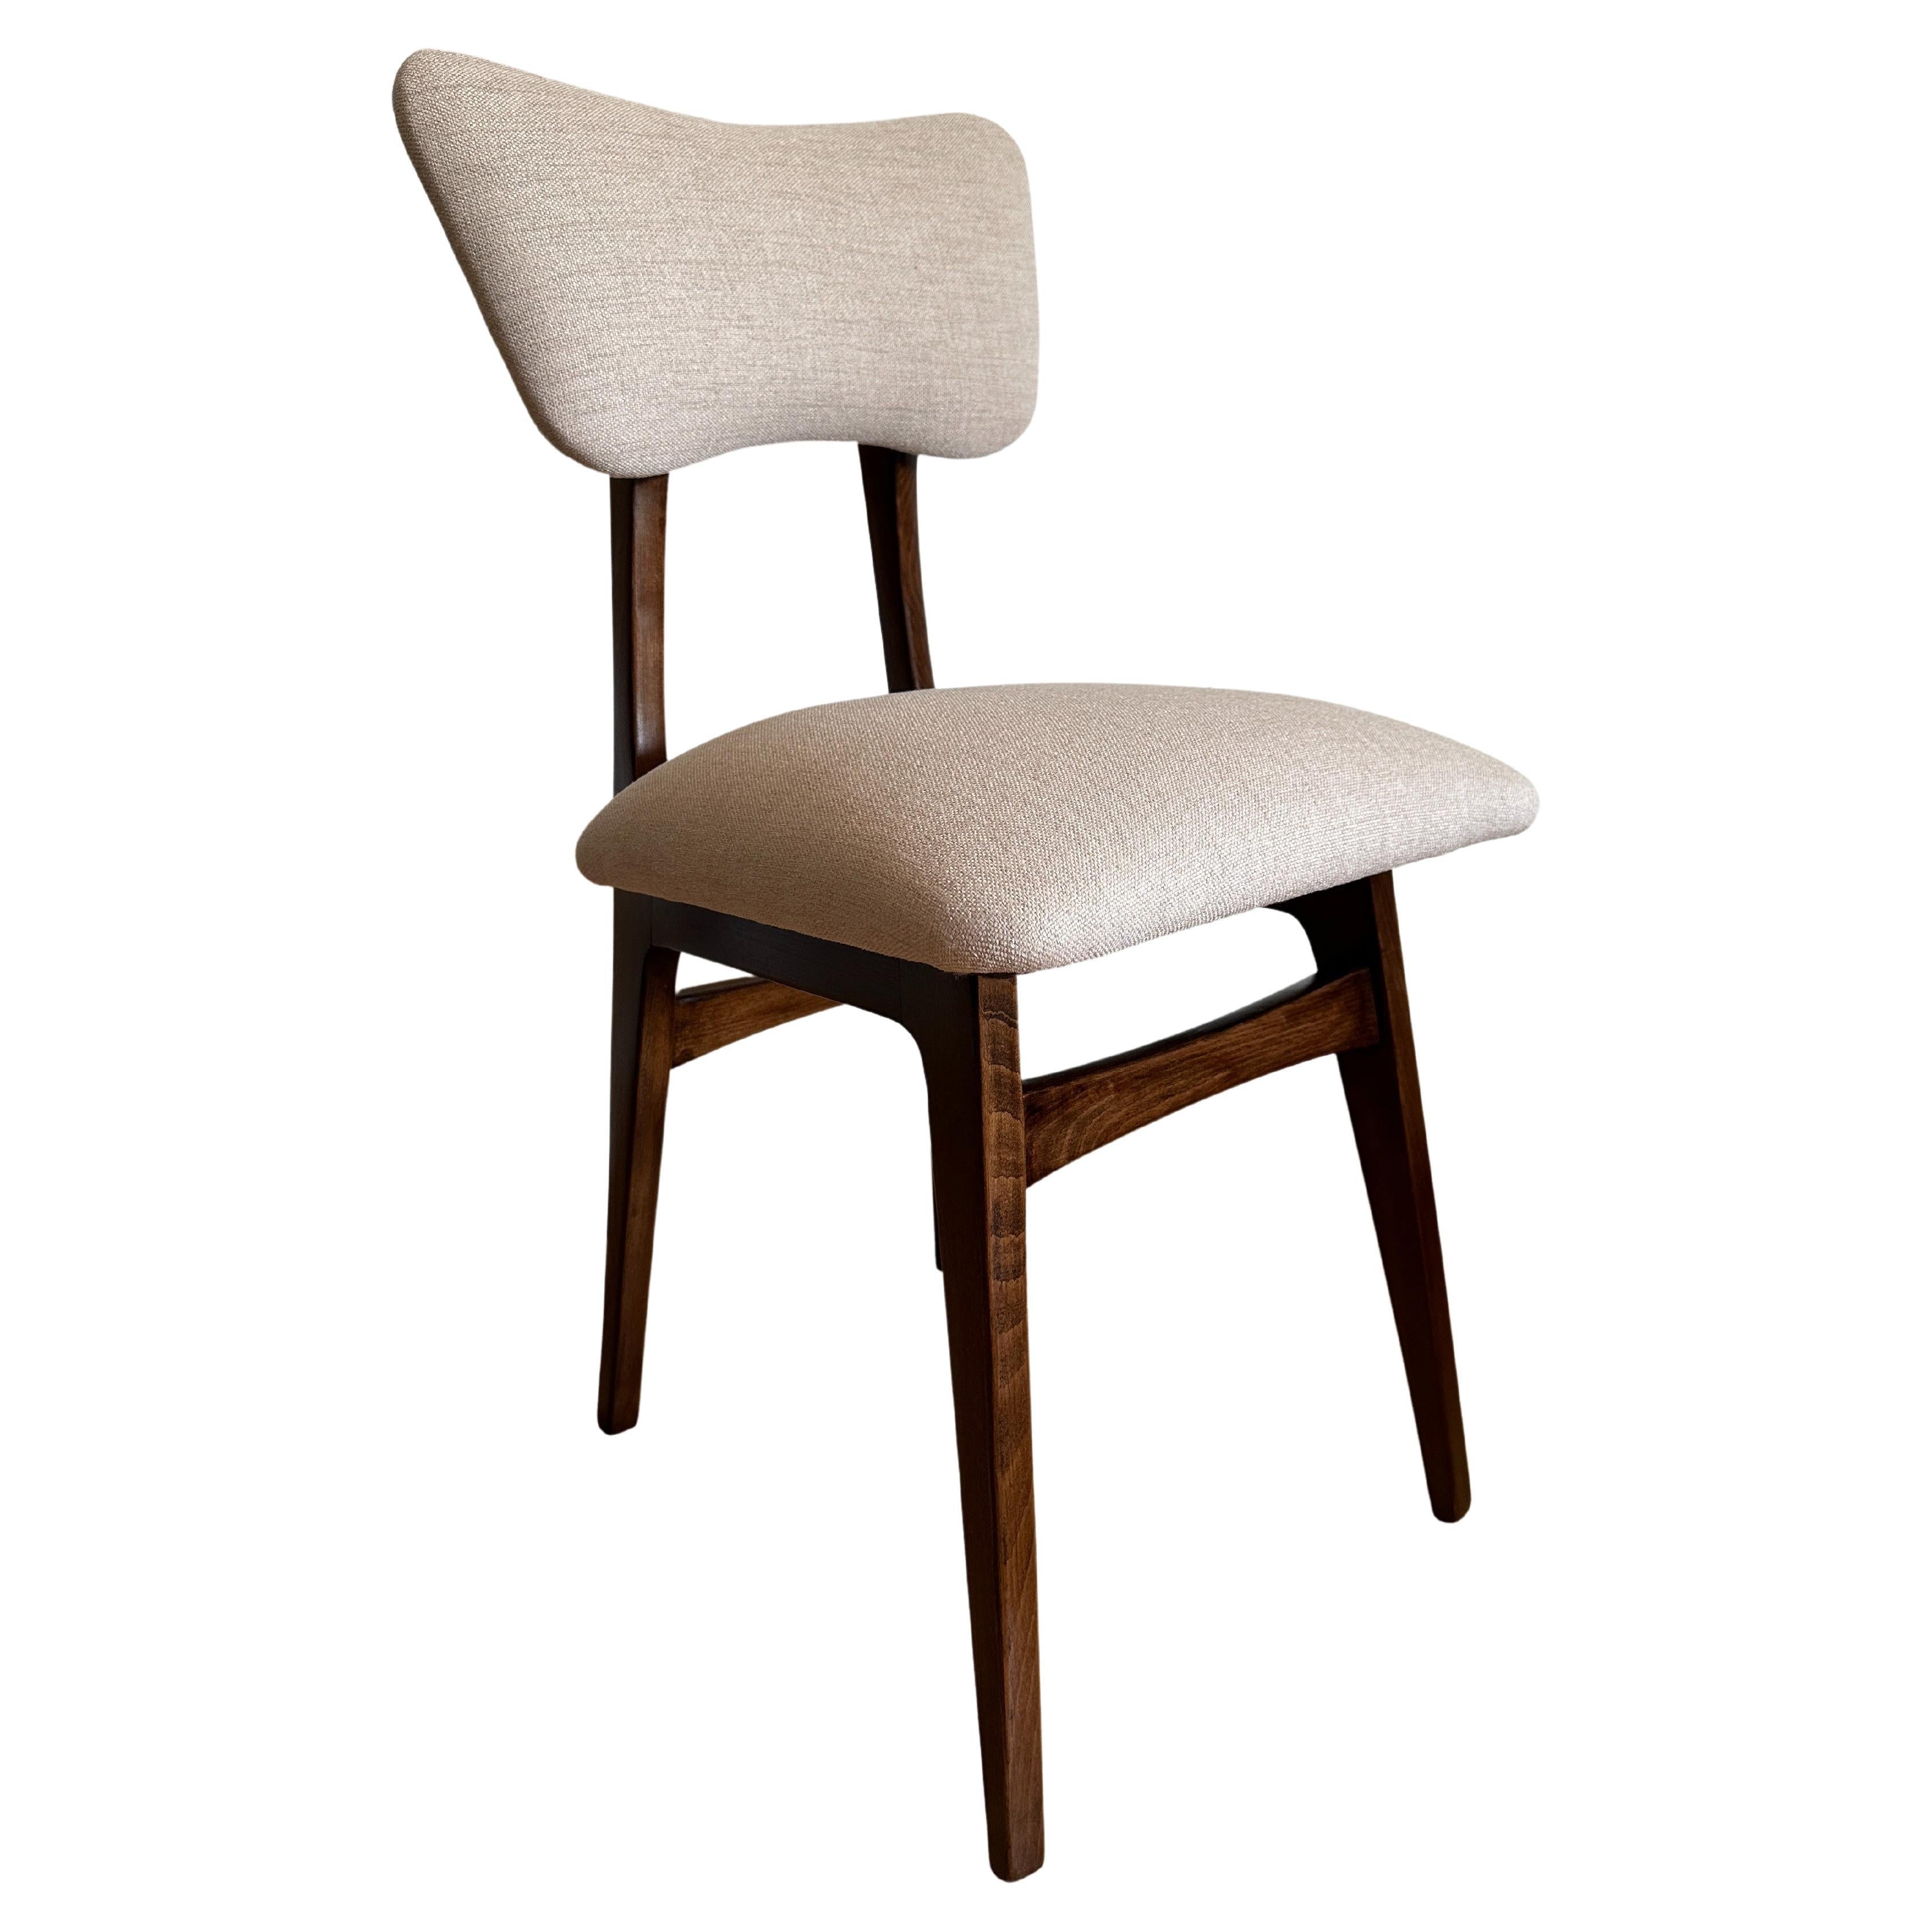 Midcentury Dining Chair in Beige, Europe, 1960s For Sale